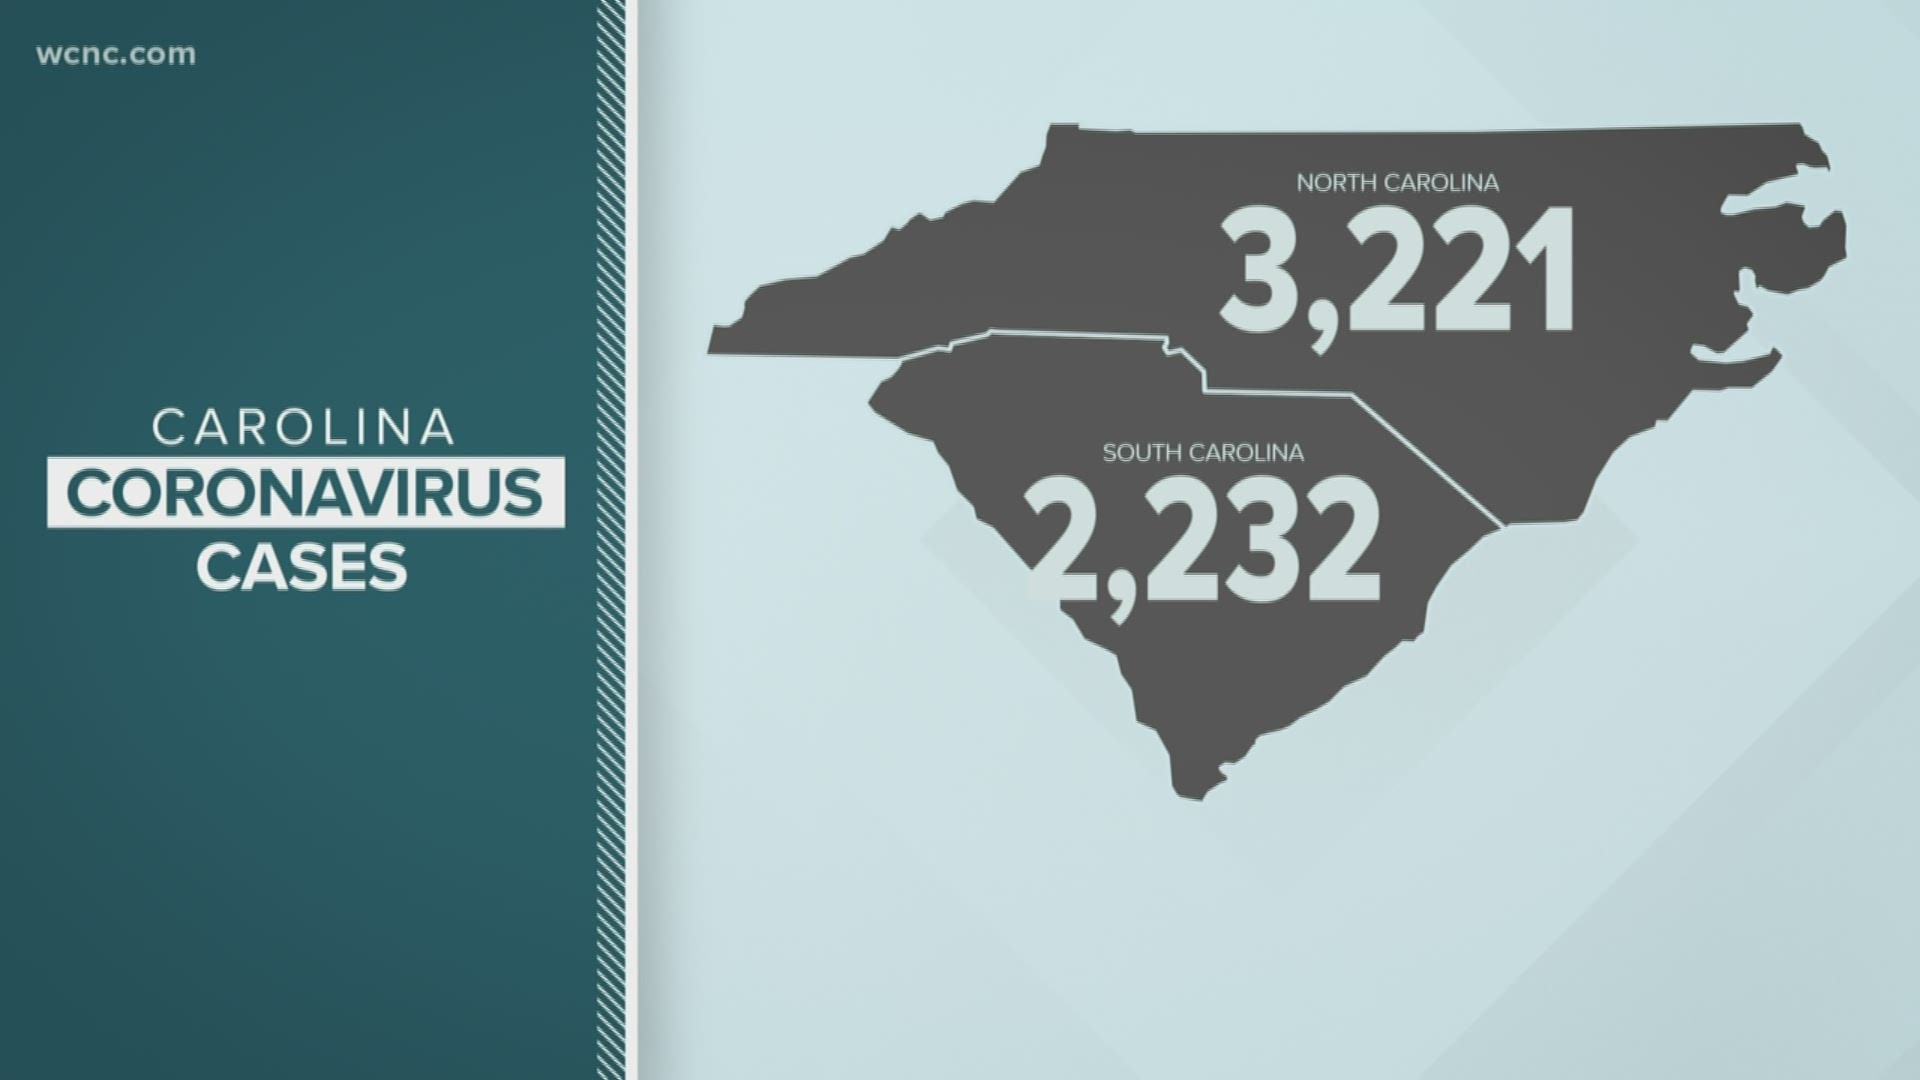 There are now over 3,200 confirmed cases of COVID-19 coronavirus in North Carolina. At least 46 people have died, including seven in Mecklenburg County.